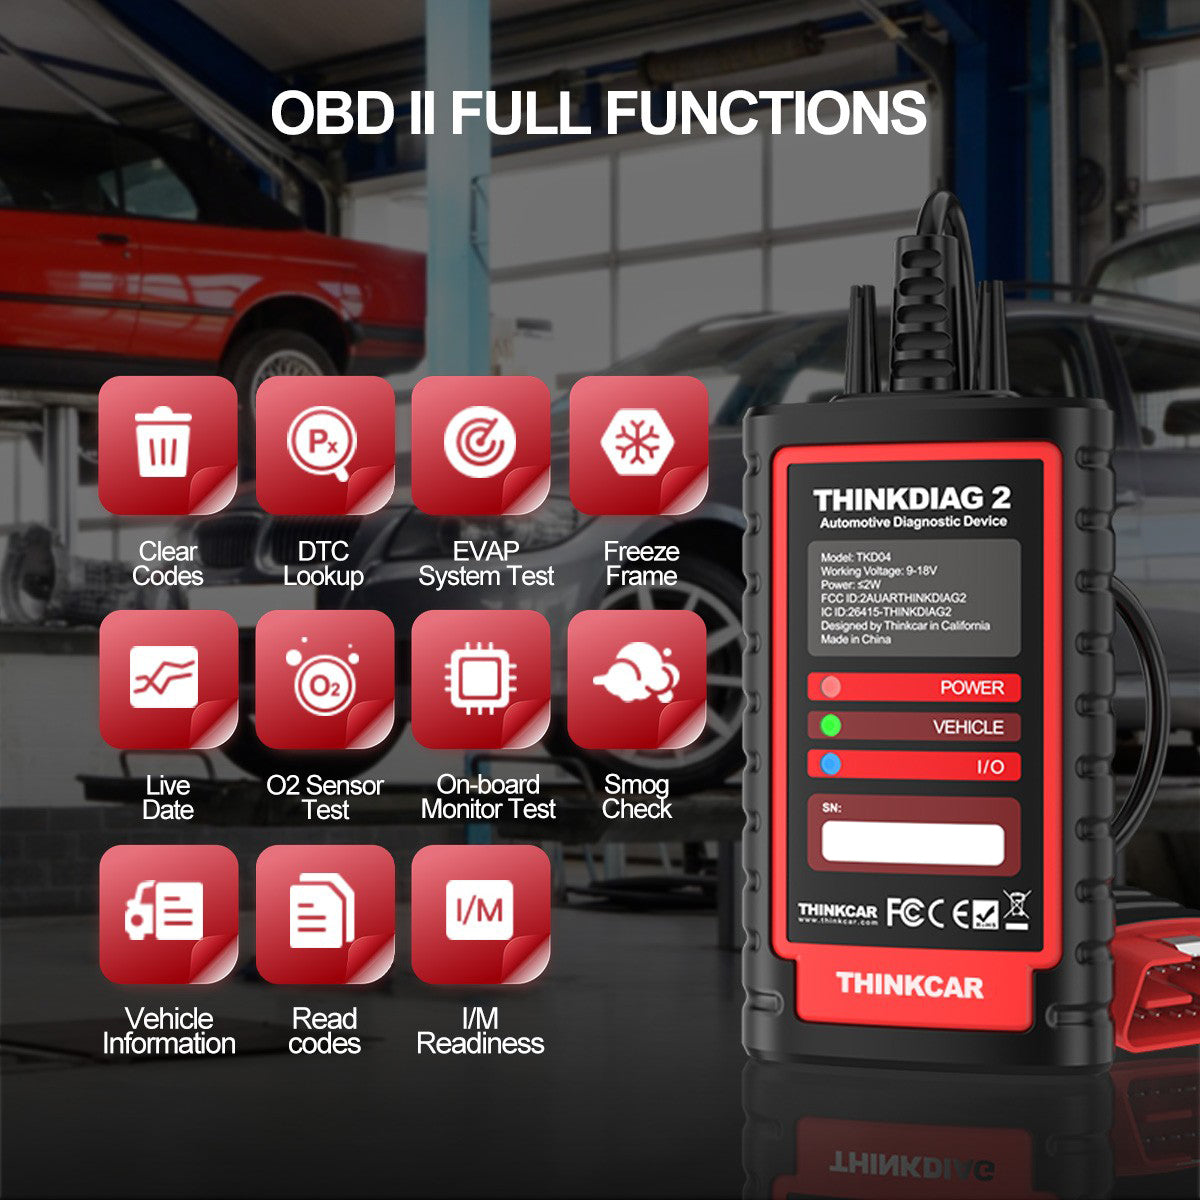 Thinkdiag2 Support 10 OBD2 Full Function